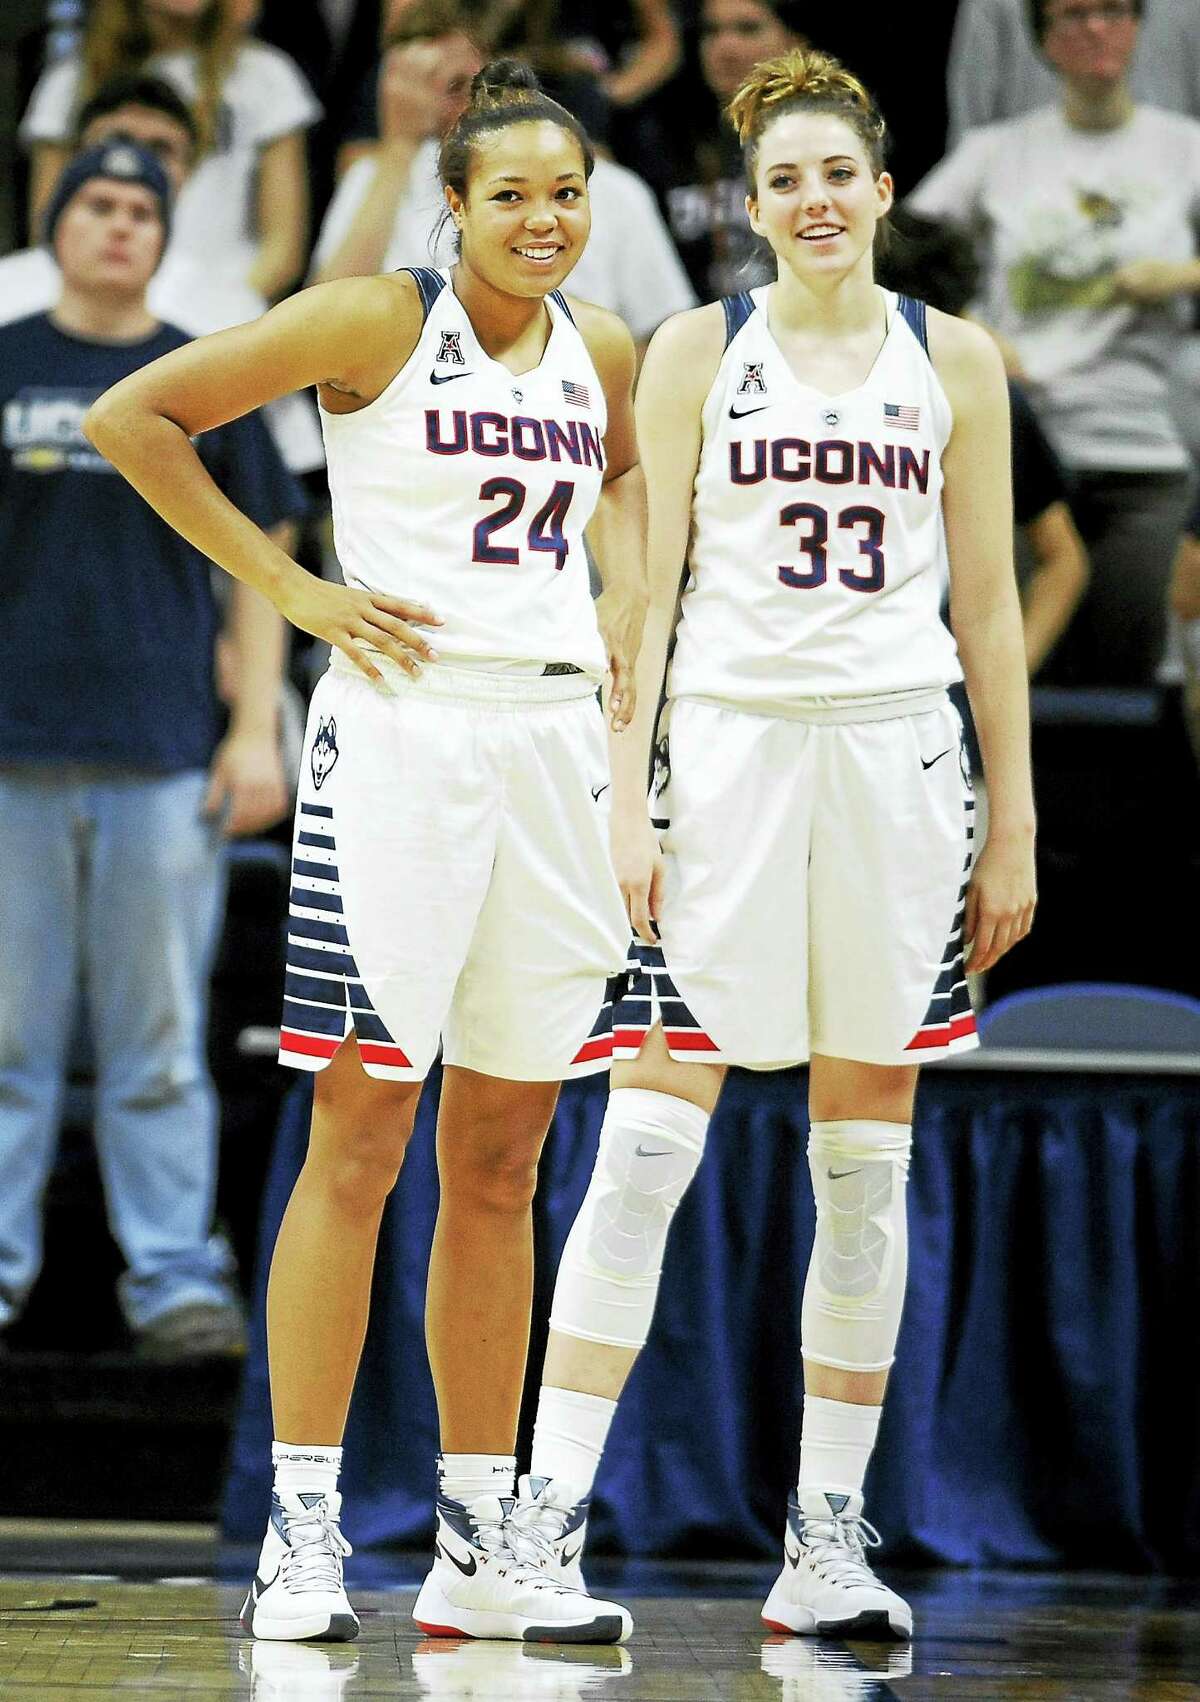 UConn’s Napheesa Collier, left, and Katie Lou Samuelson stand together during a game earlier this season.